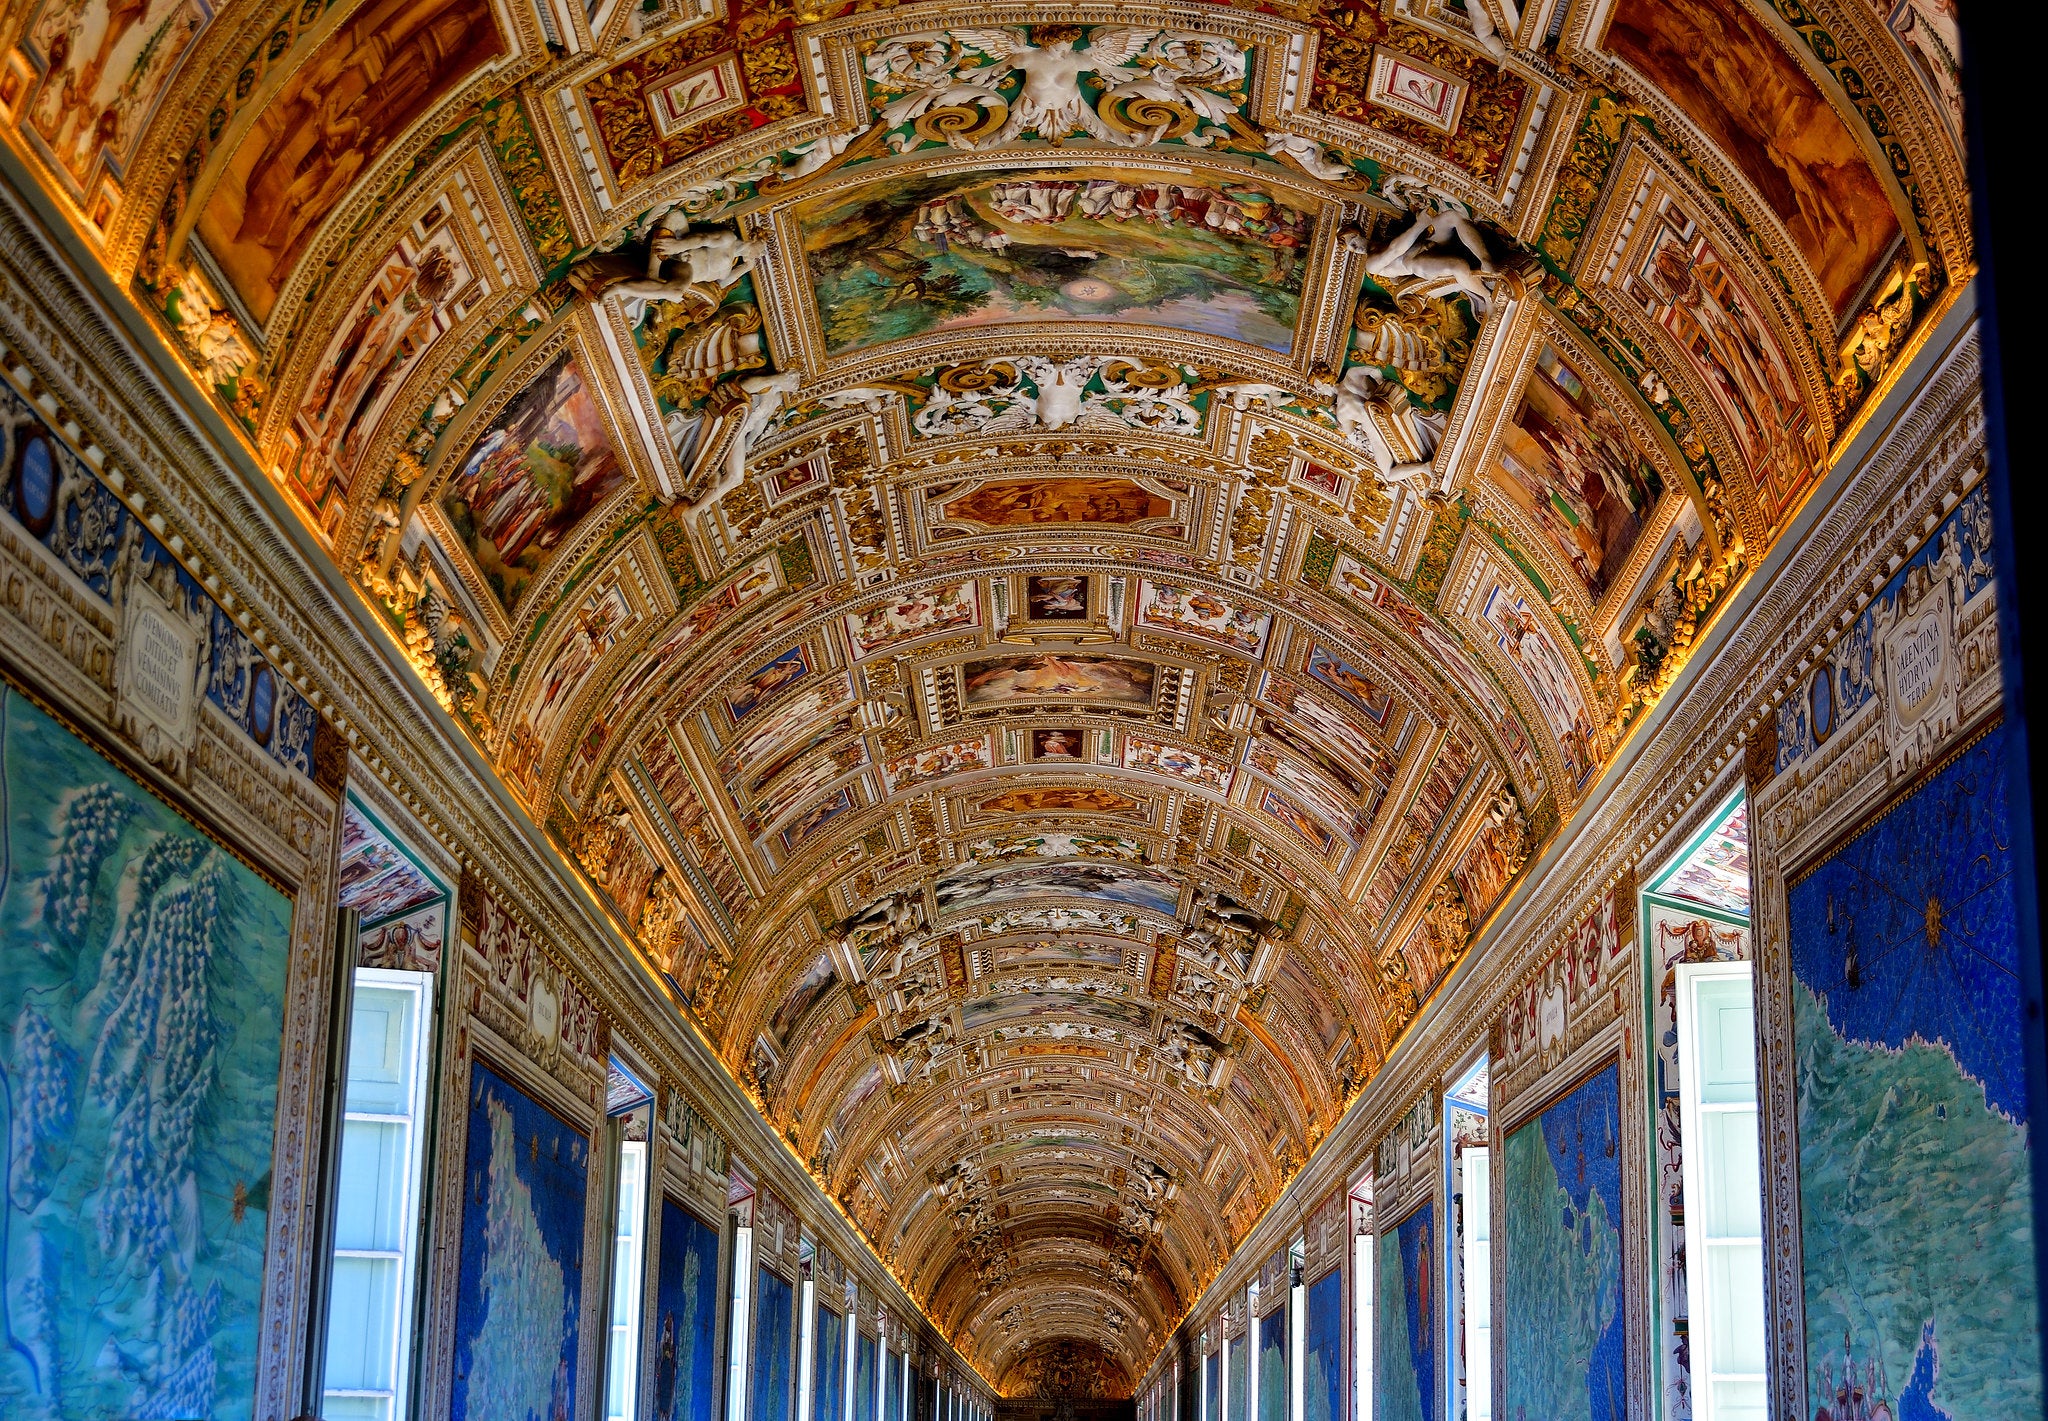 A photo from inside the Vatican Museum by Philip Wood